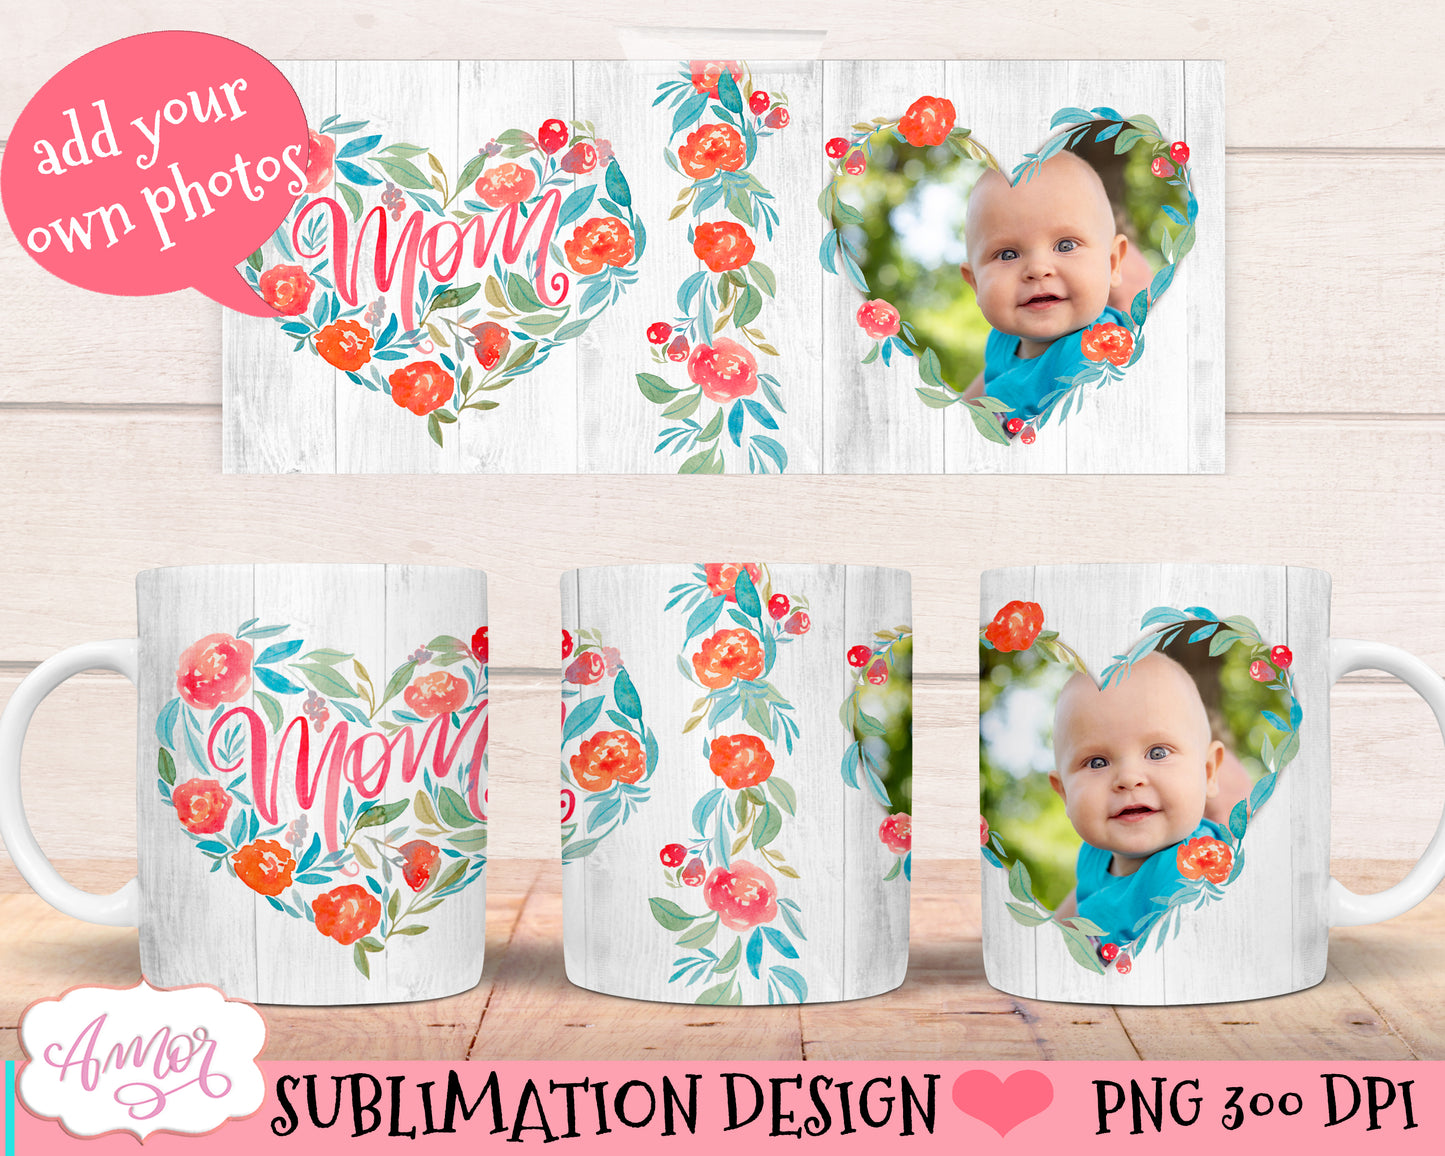 Mother's day photo mug wrap template for sublimation